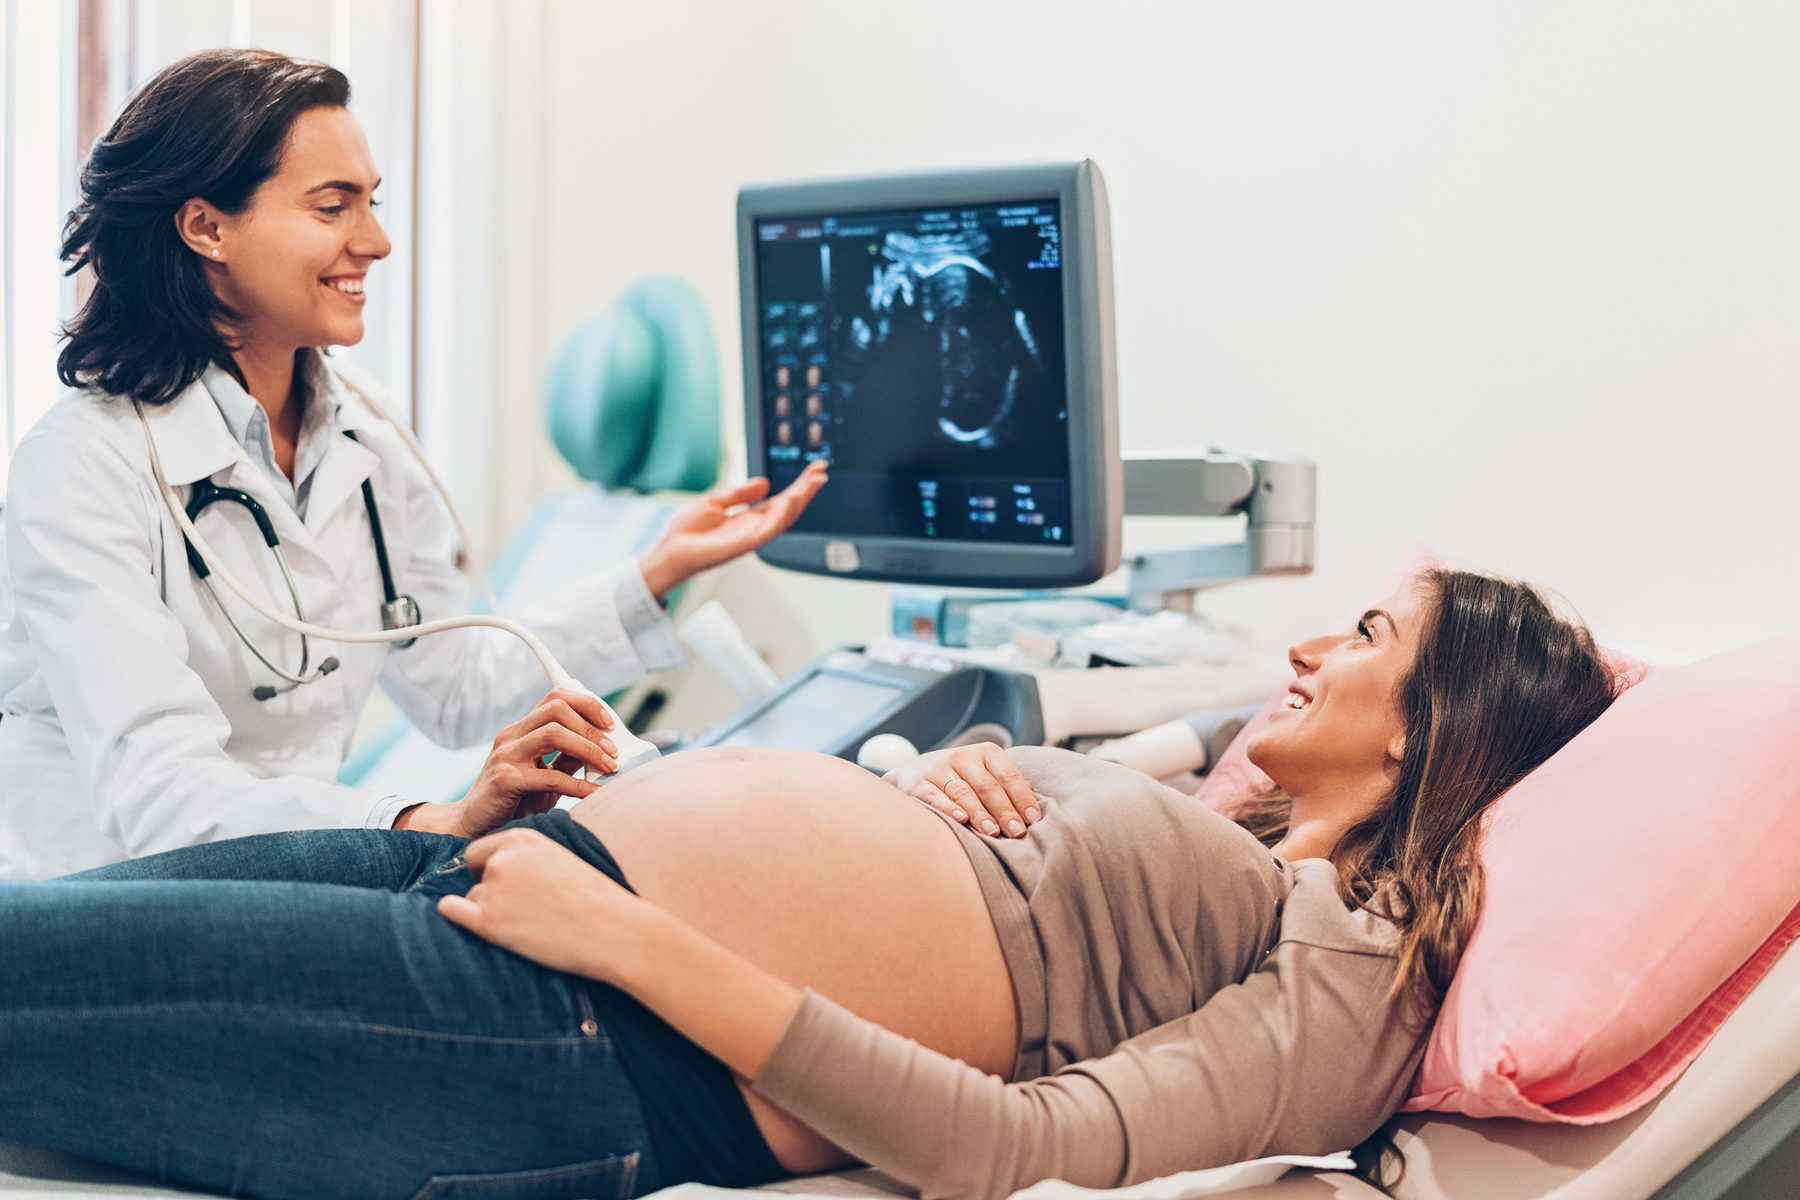 The Fetus - The Effects Of Ultrasound And MRI